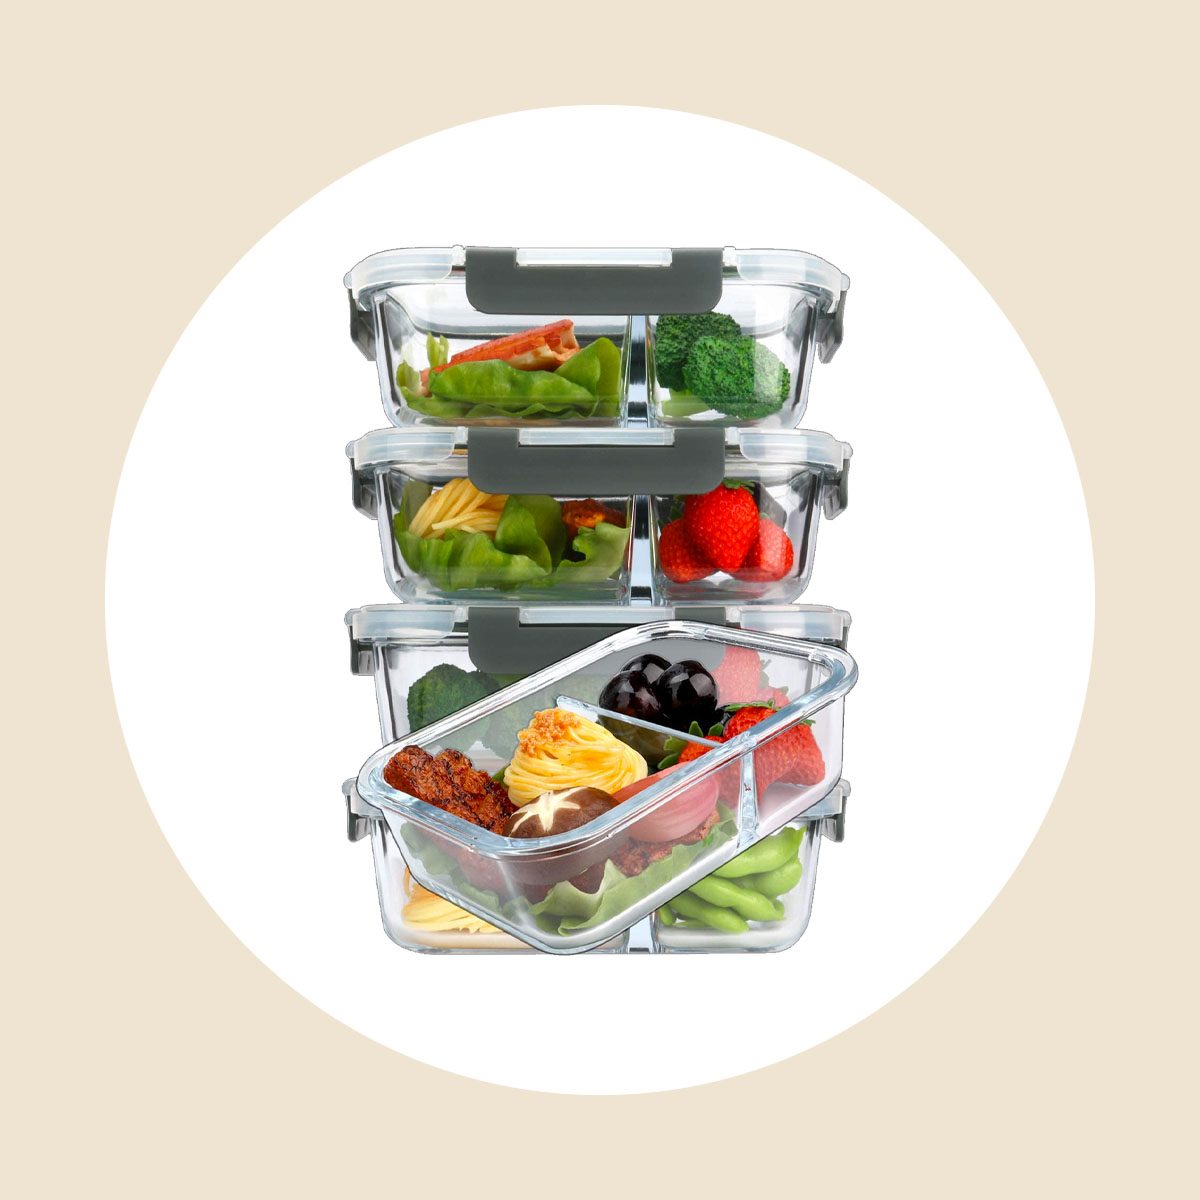 HOMBERKING 10 Pack Glass Meal Prep Containers, Food Storage Blue